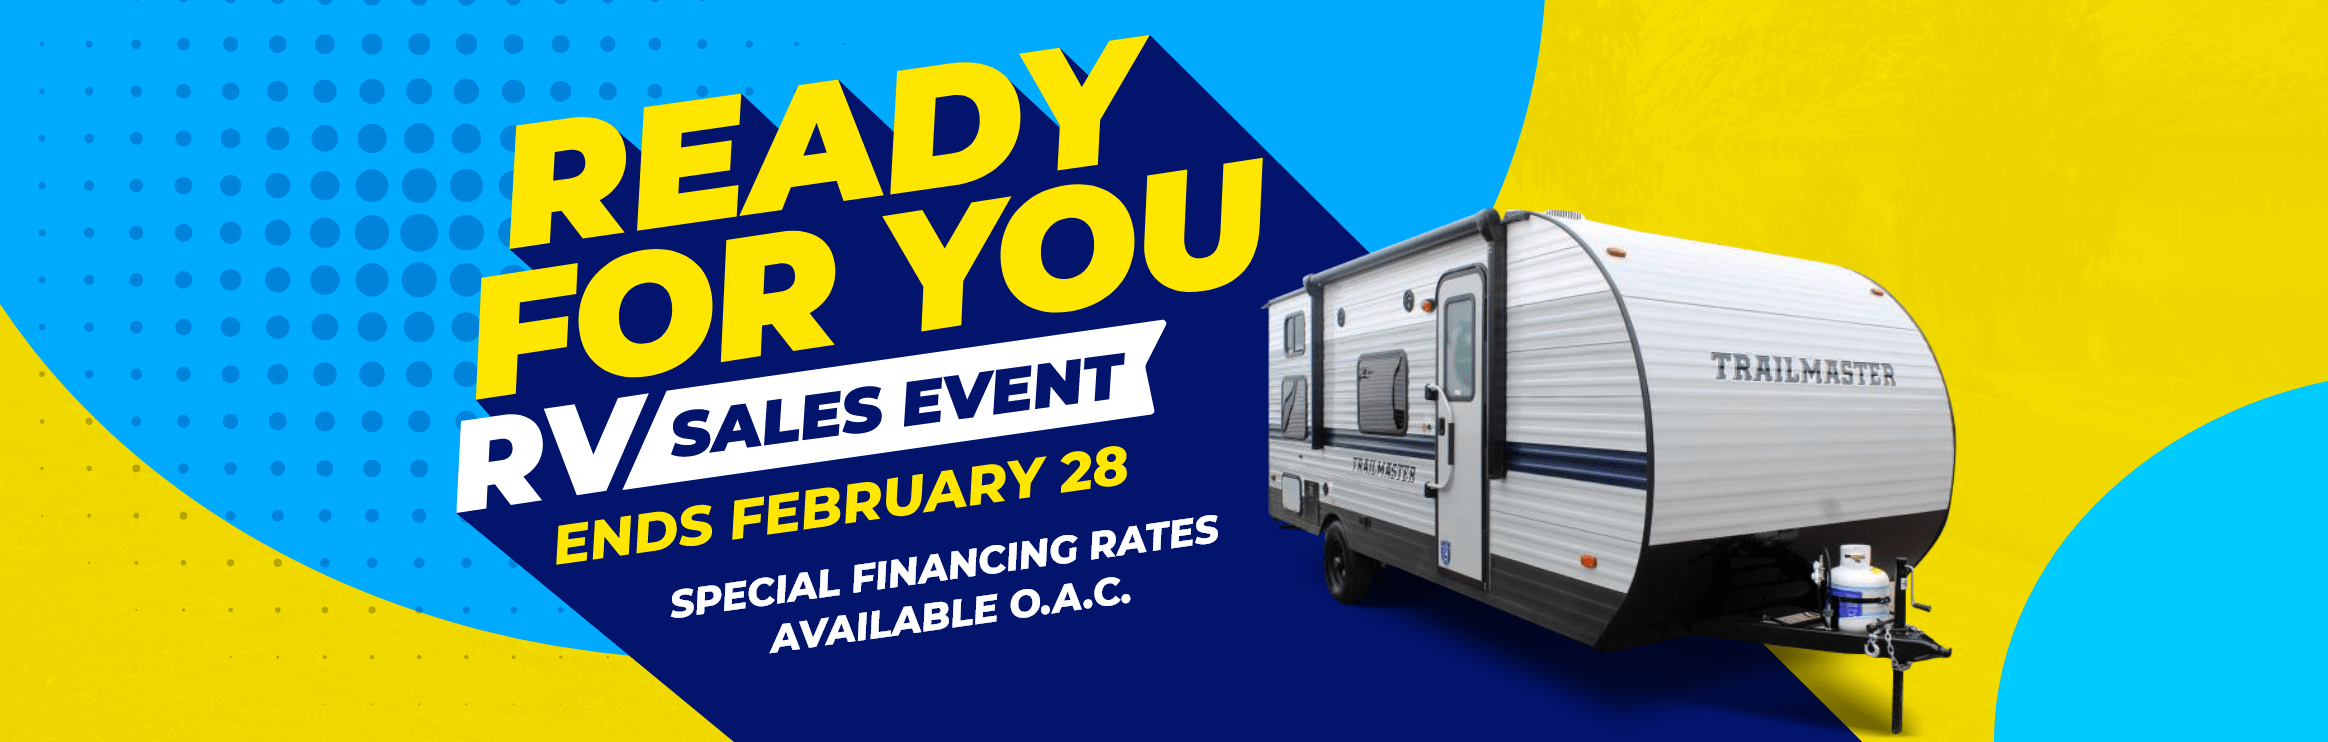 Ready For You RV Sales Event